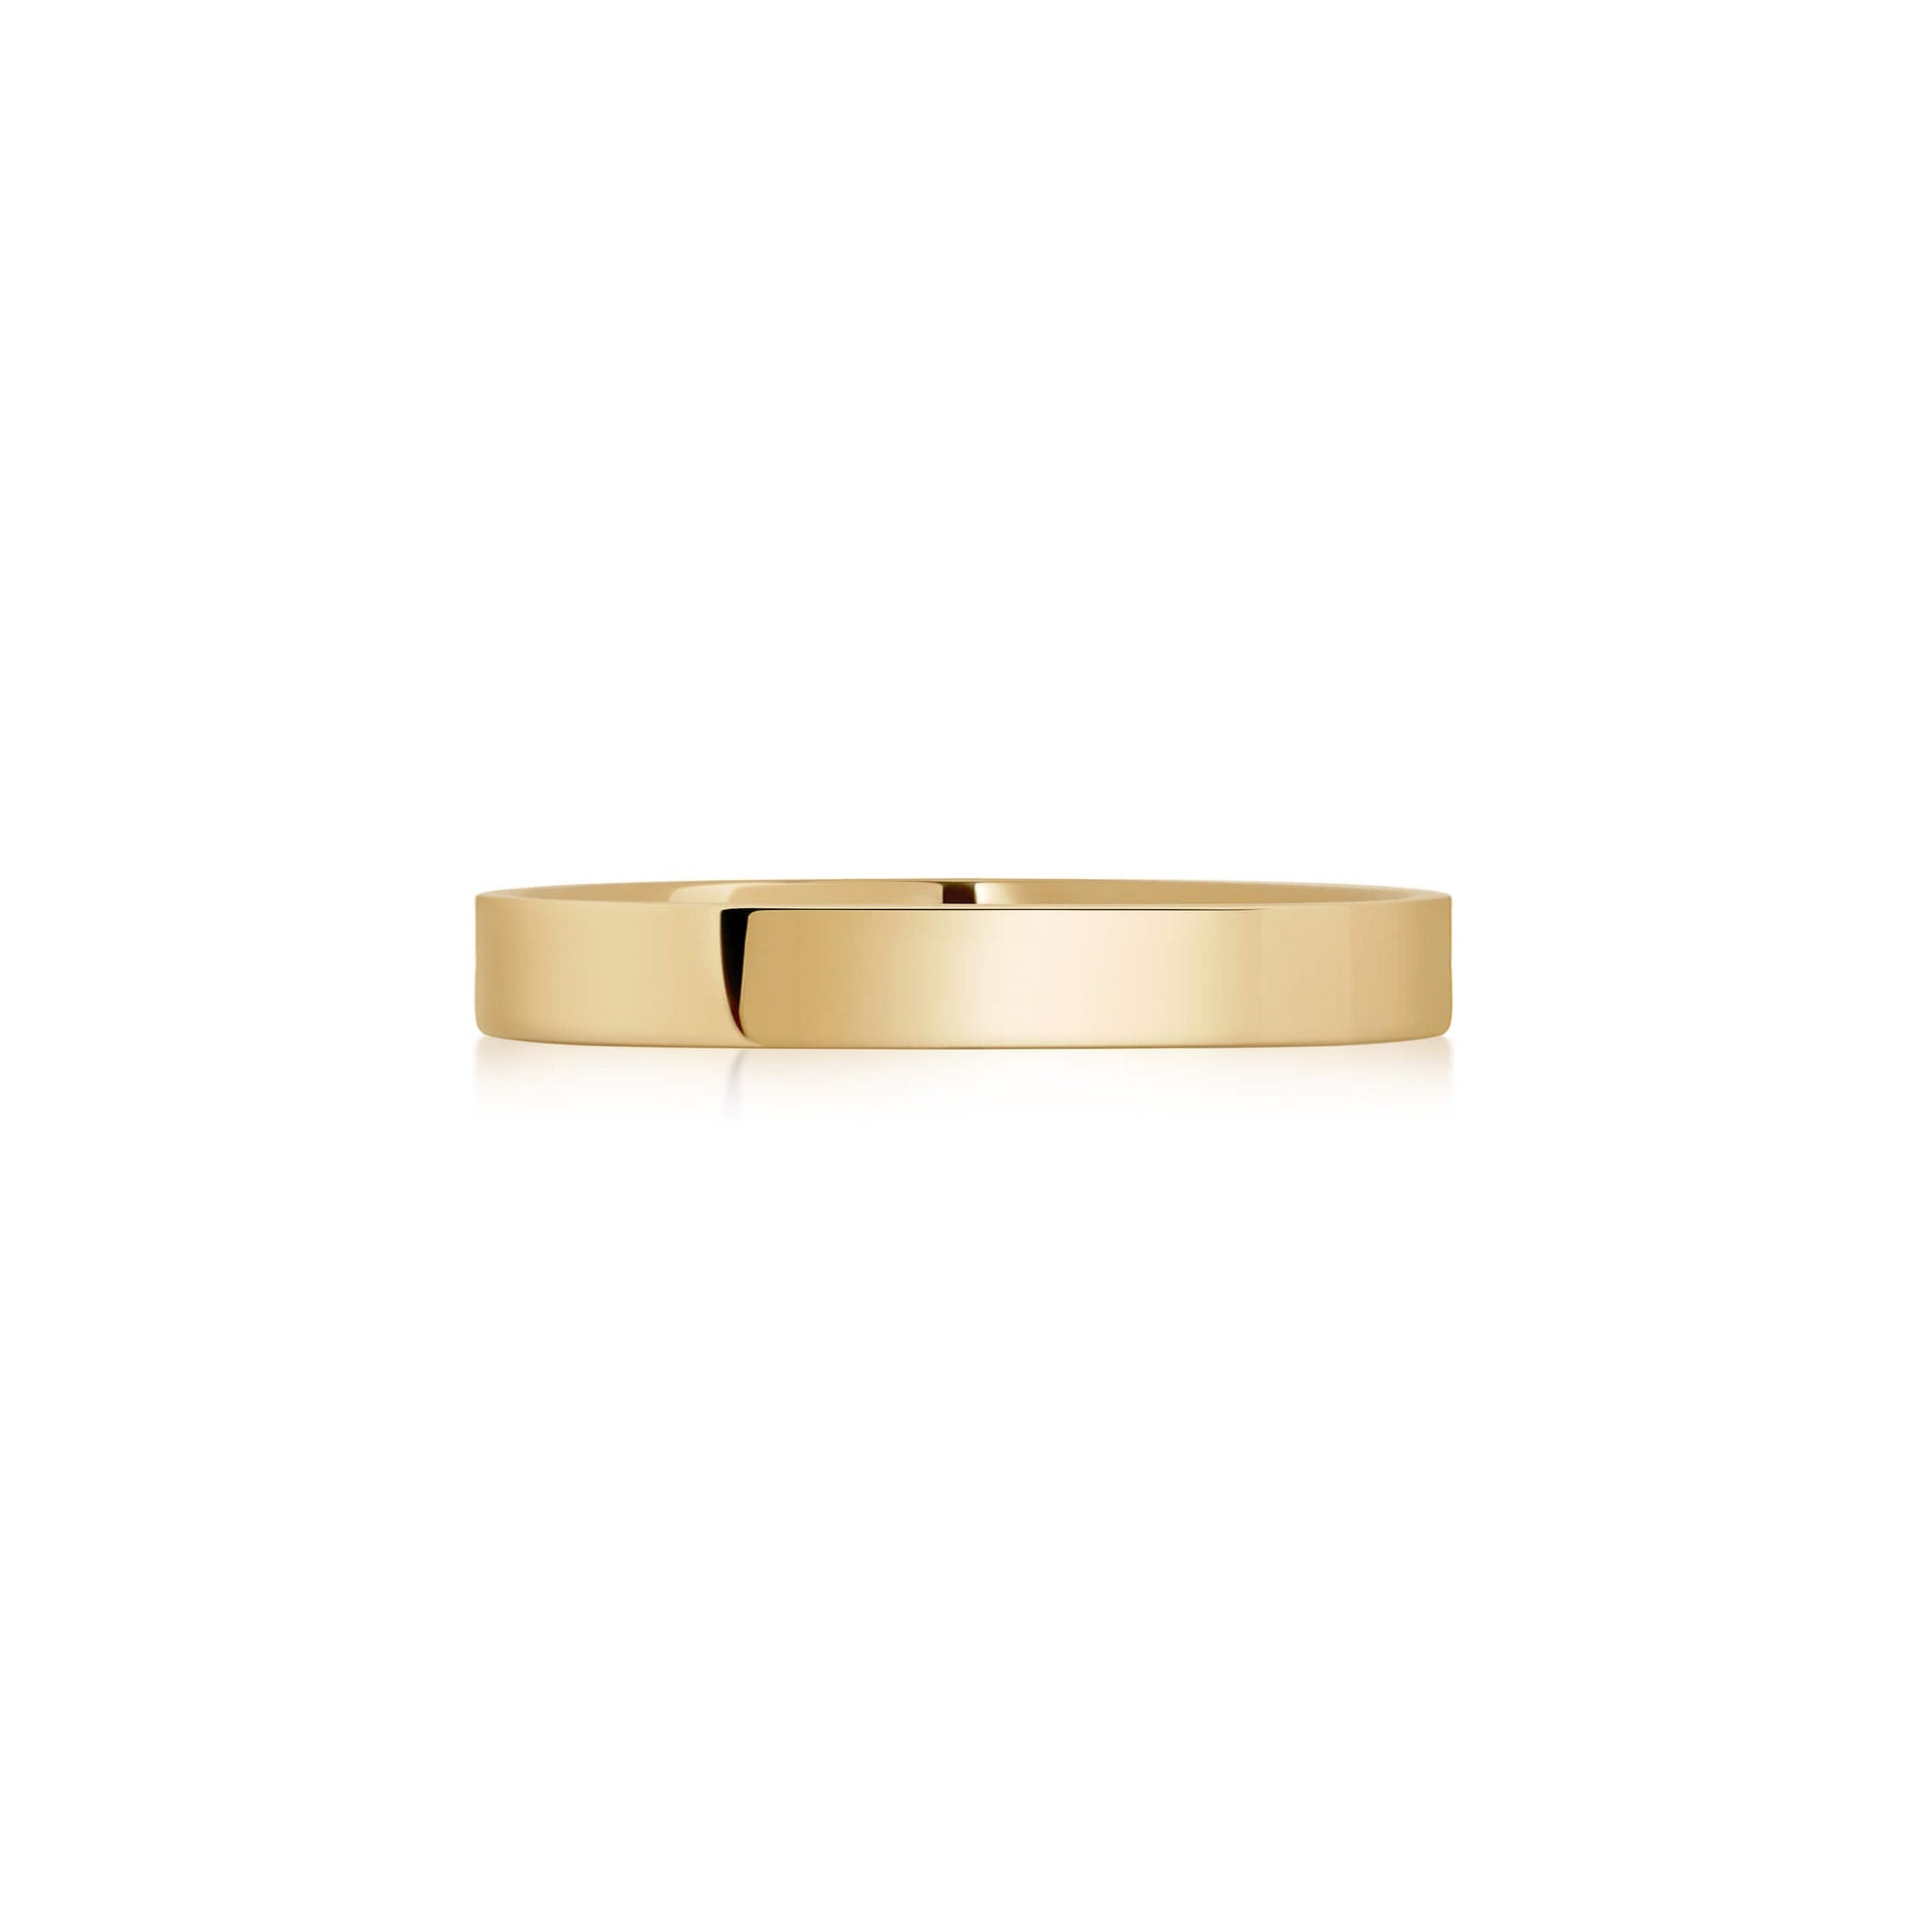 CIGAR BAND (2mm wide) - Trove & Co.